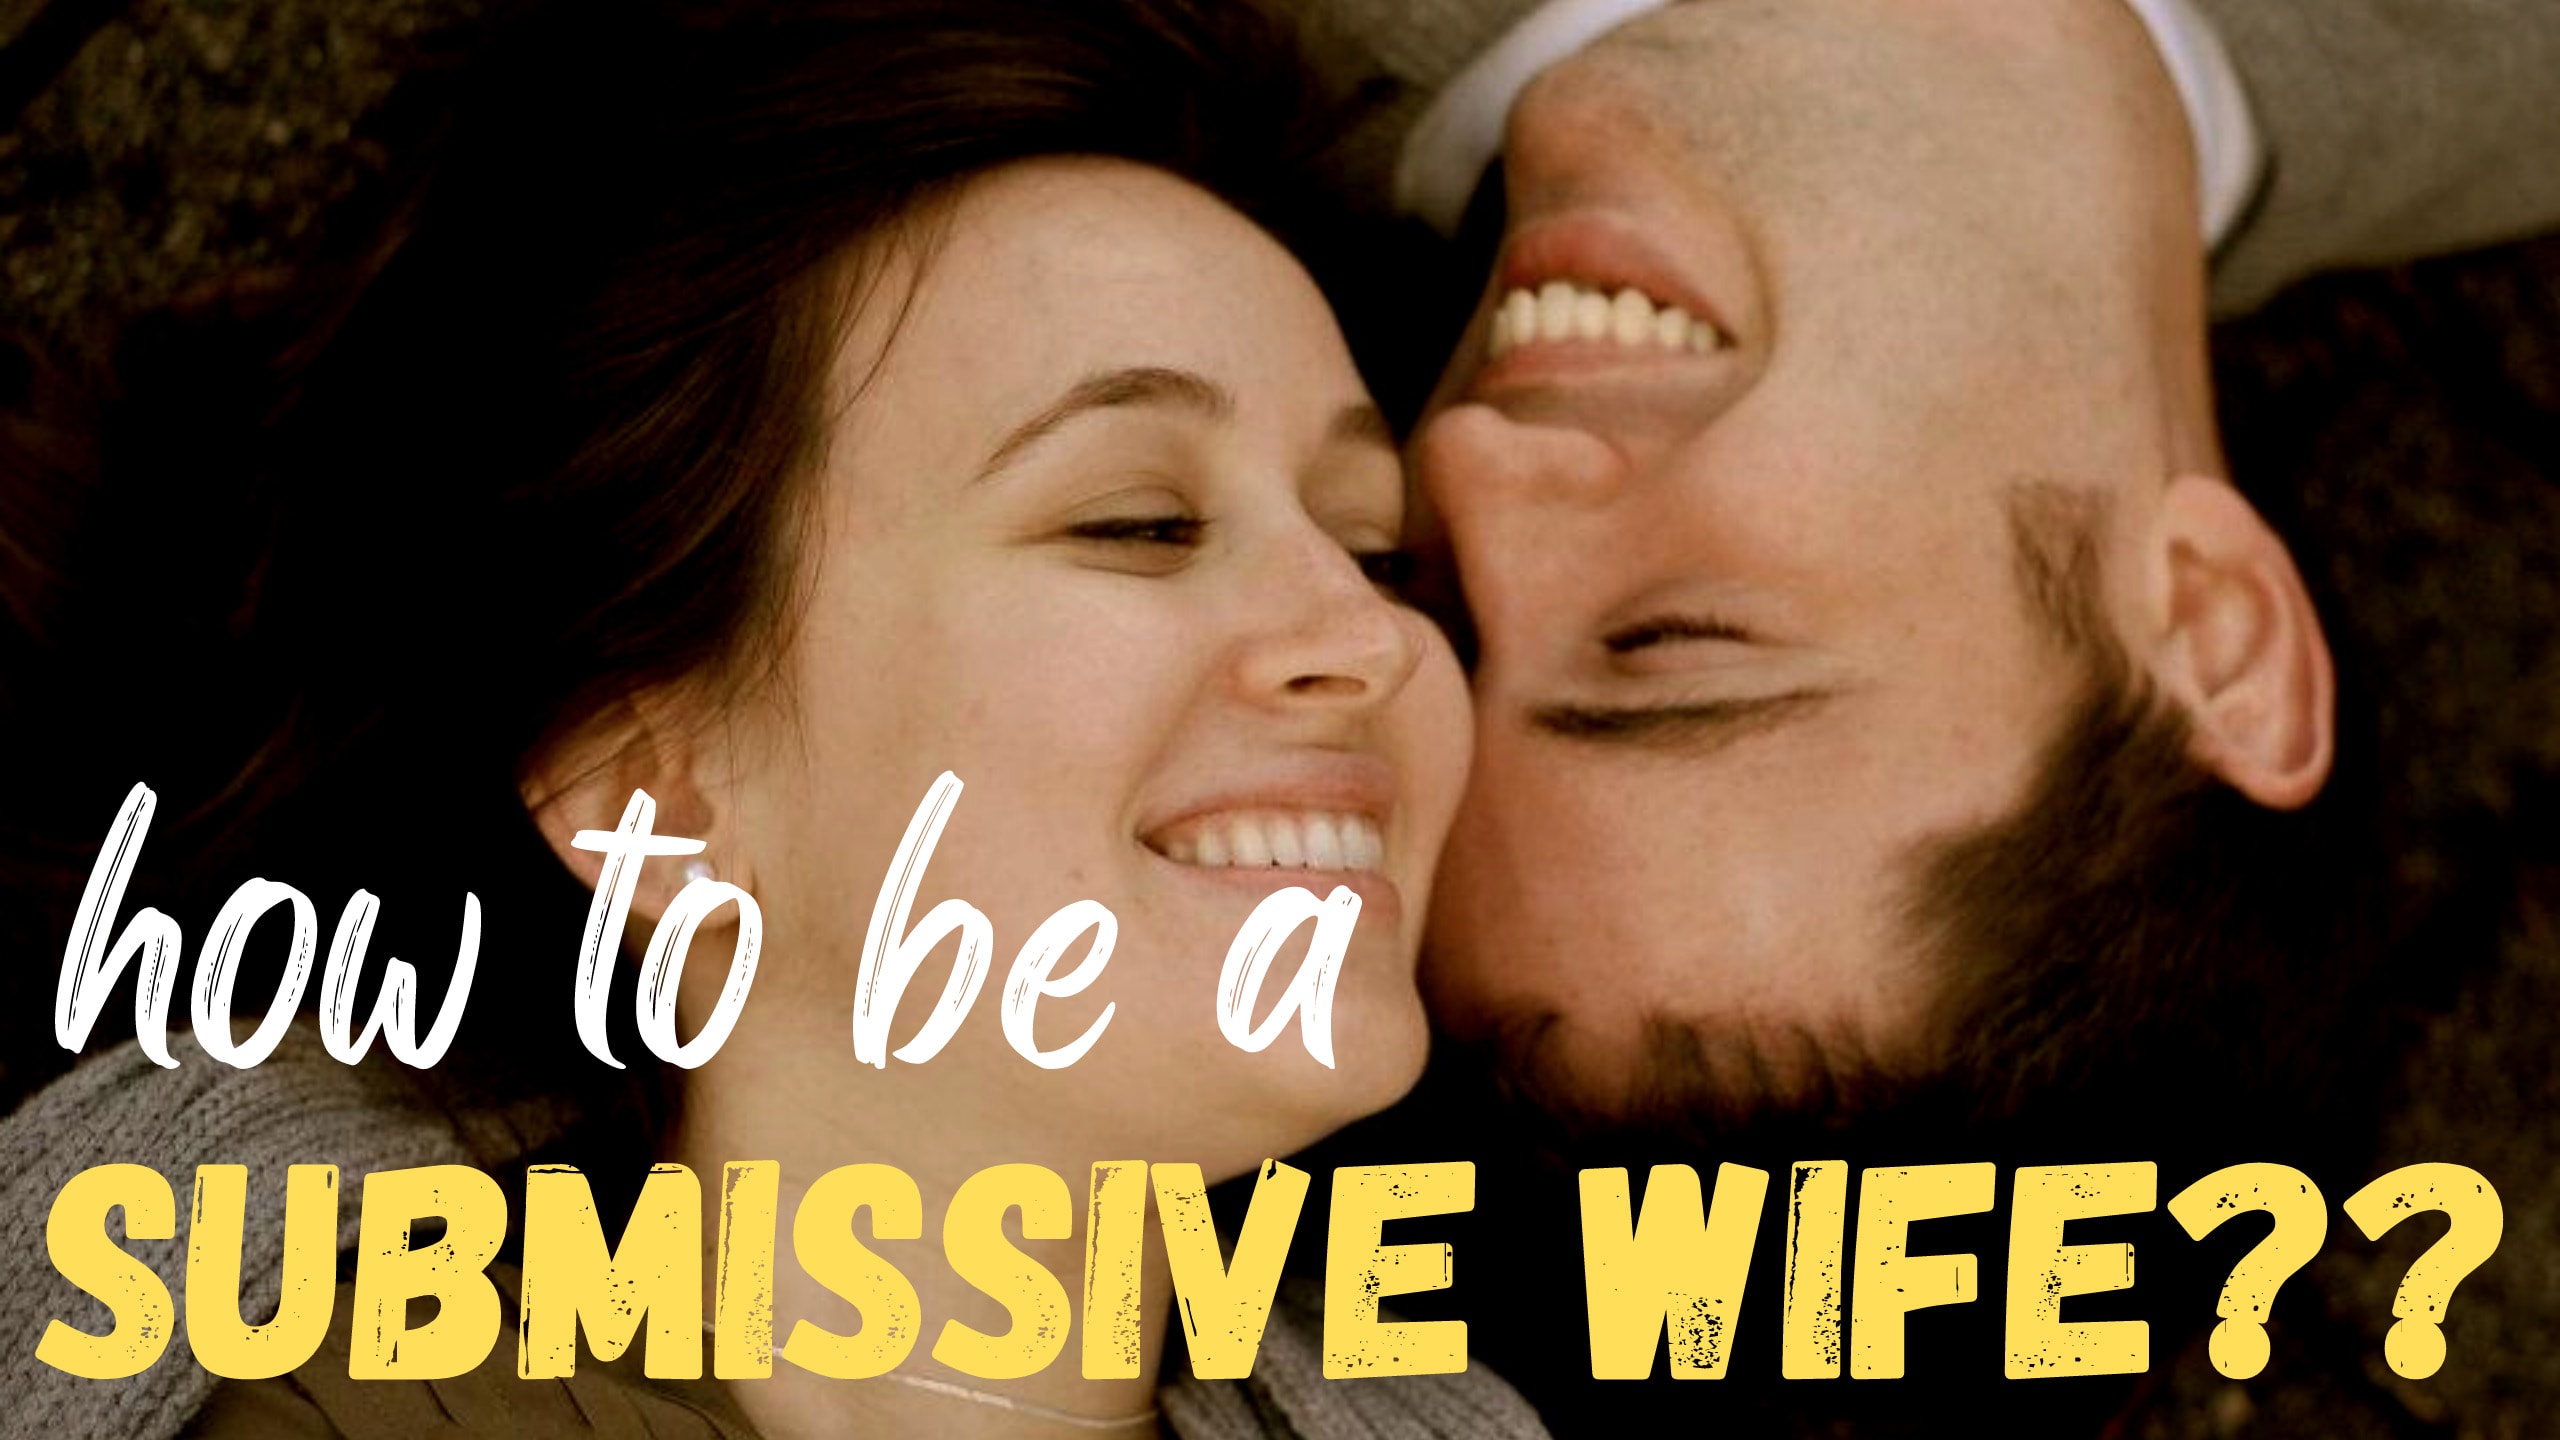 5 Ways to Be a Submissive Wife